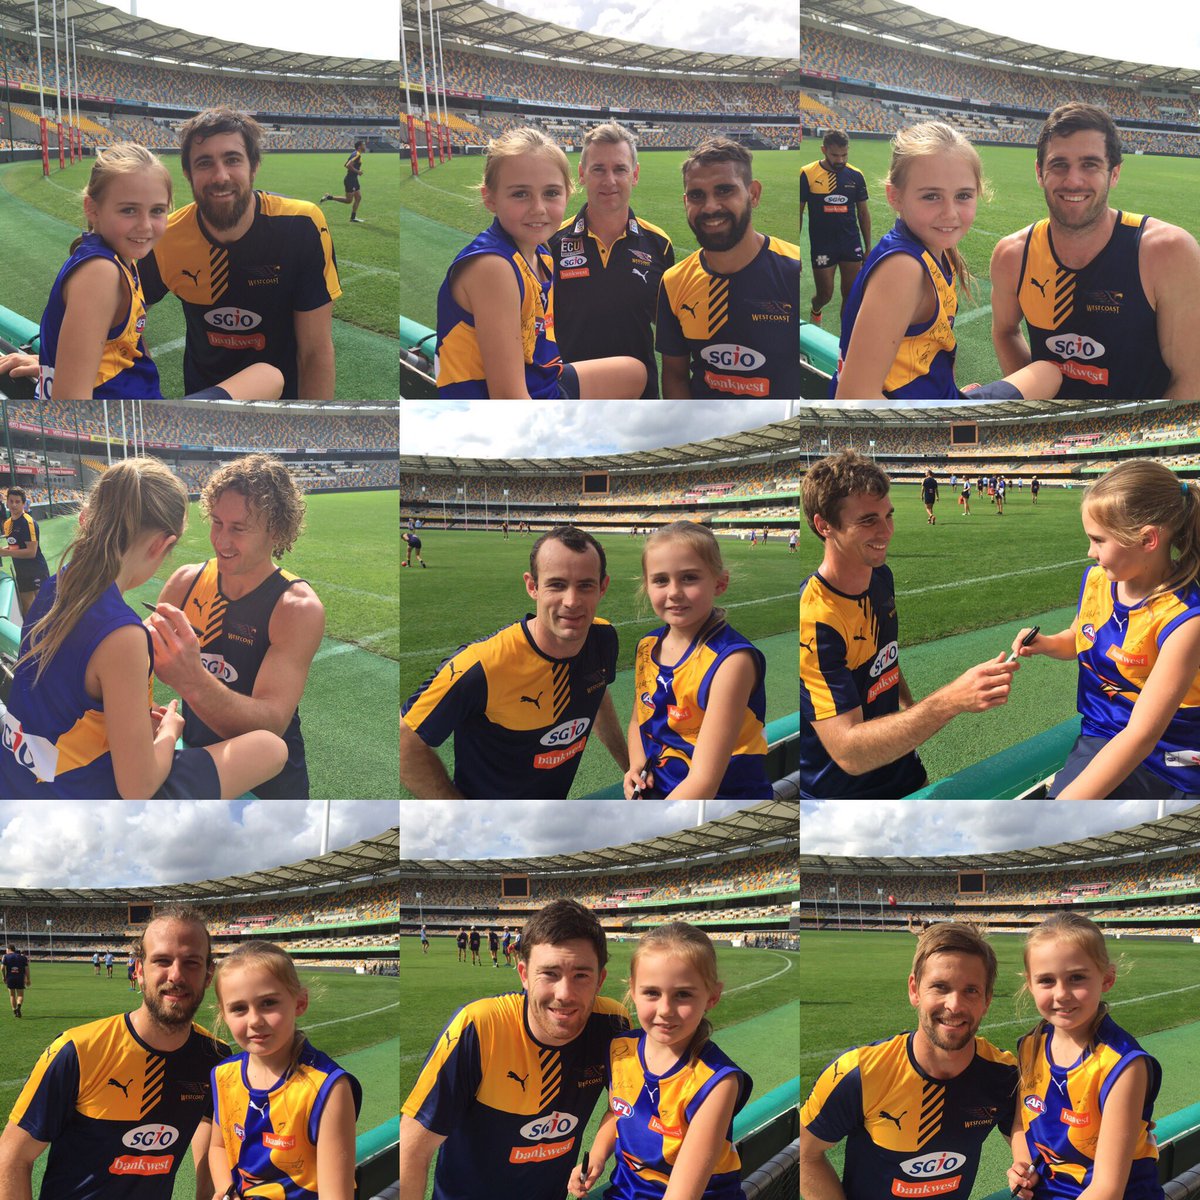 @WestCoastEagles thanks boys for taking the time to say hi after training. #betterthanschool